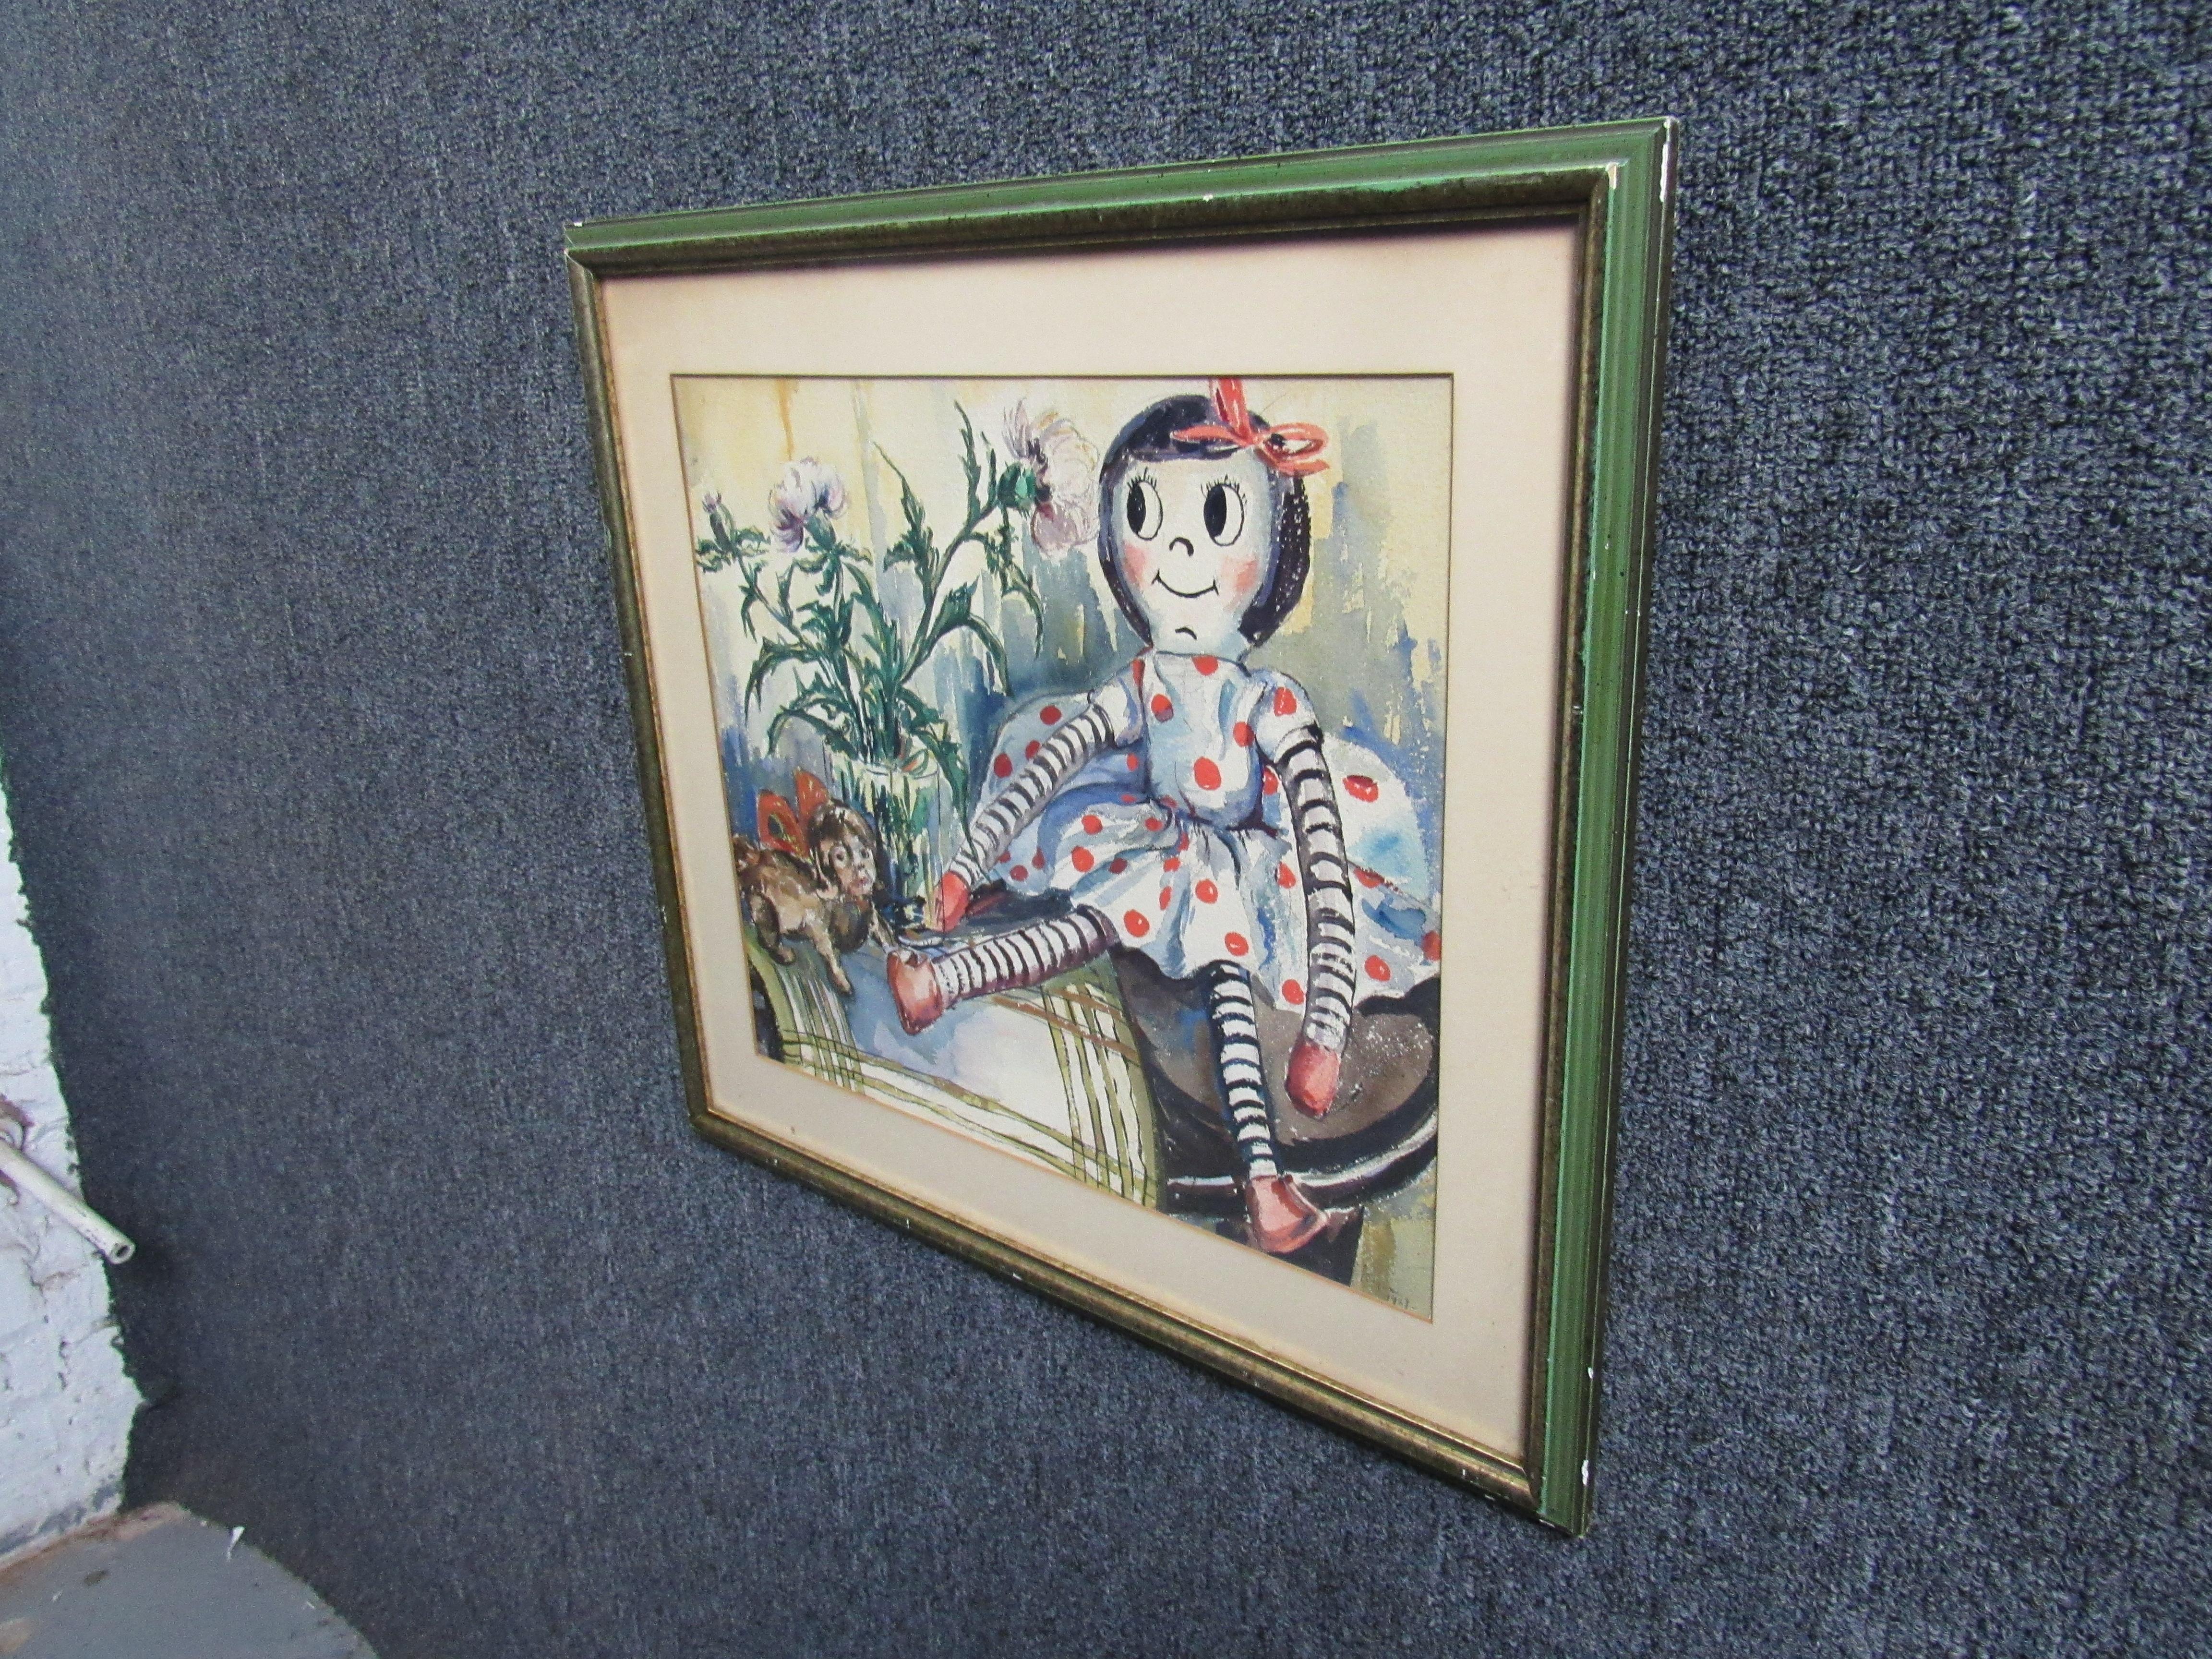 Don't miss out on a truly unique, once-in-a-lifetime piece of genuine folk art. This endlessly whimsical watercolor features an intriguing playful still life of Johnny Gruelle's iconic 